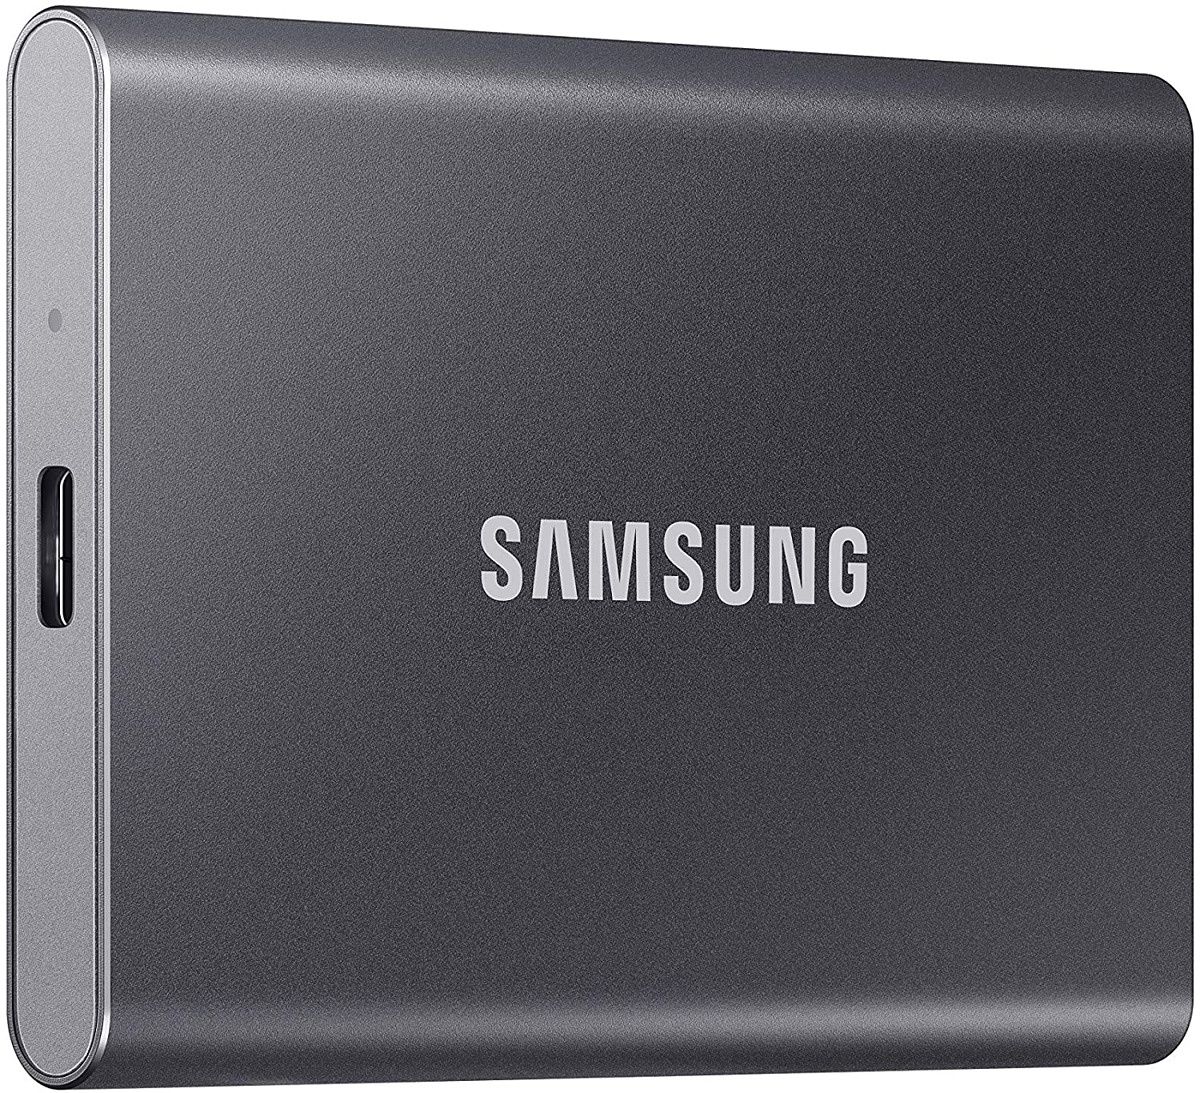 The Samsung 500GB Portable SSD T7 is on sale at 30% off the original price.  1TB and 2TB sizes are also discounted, but the discounts aren't that high.